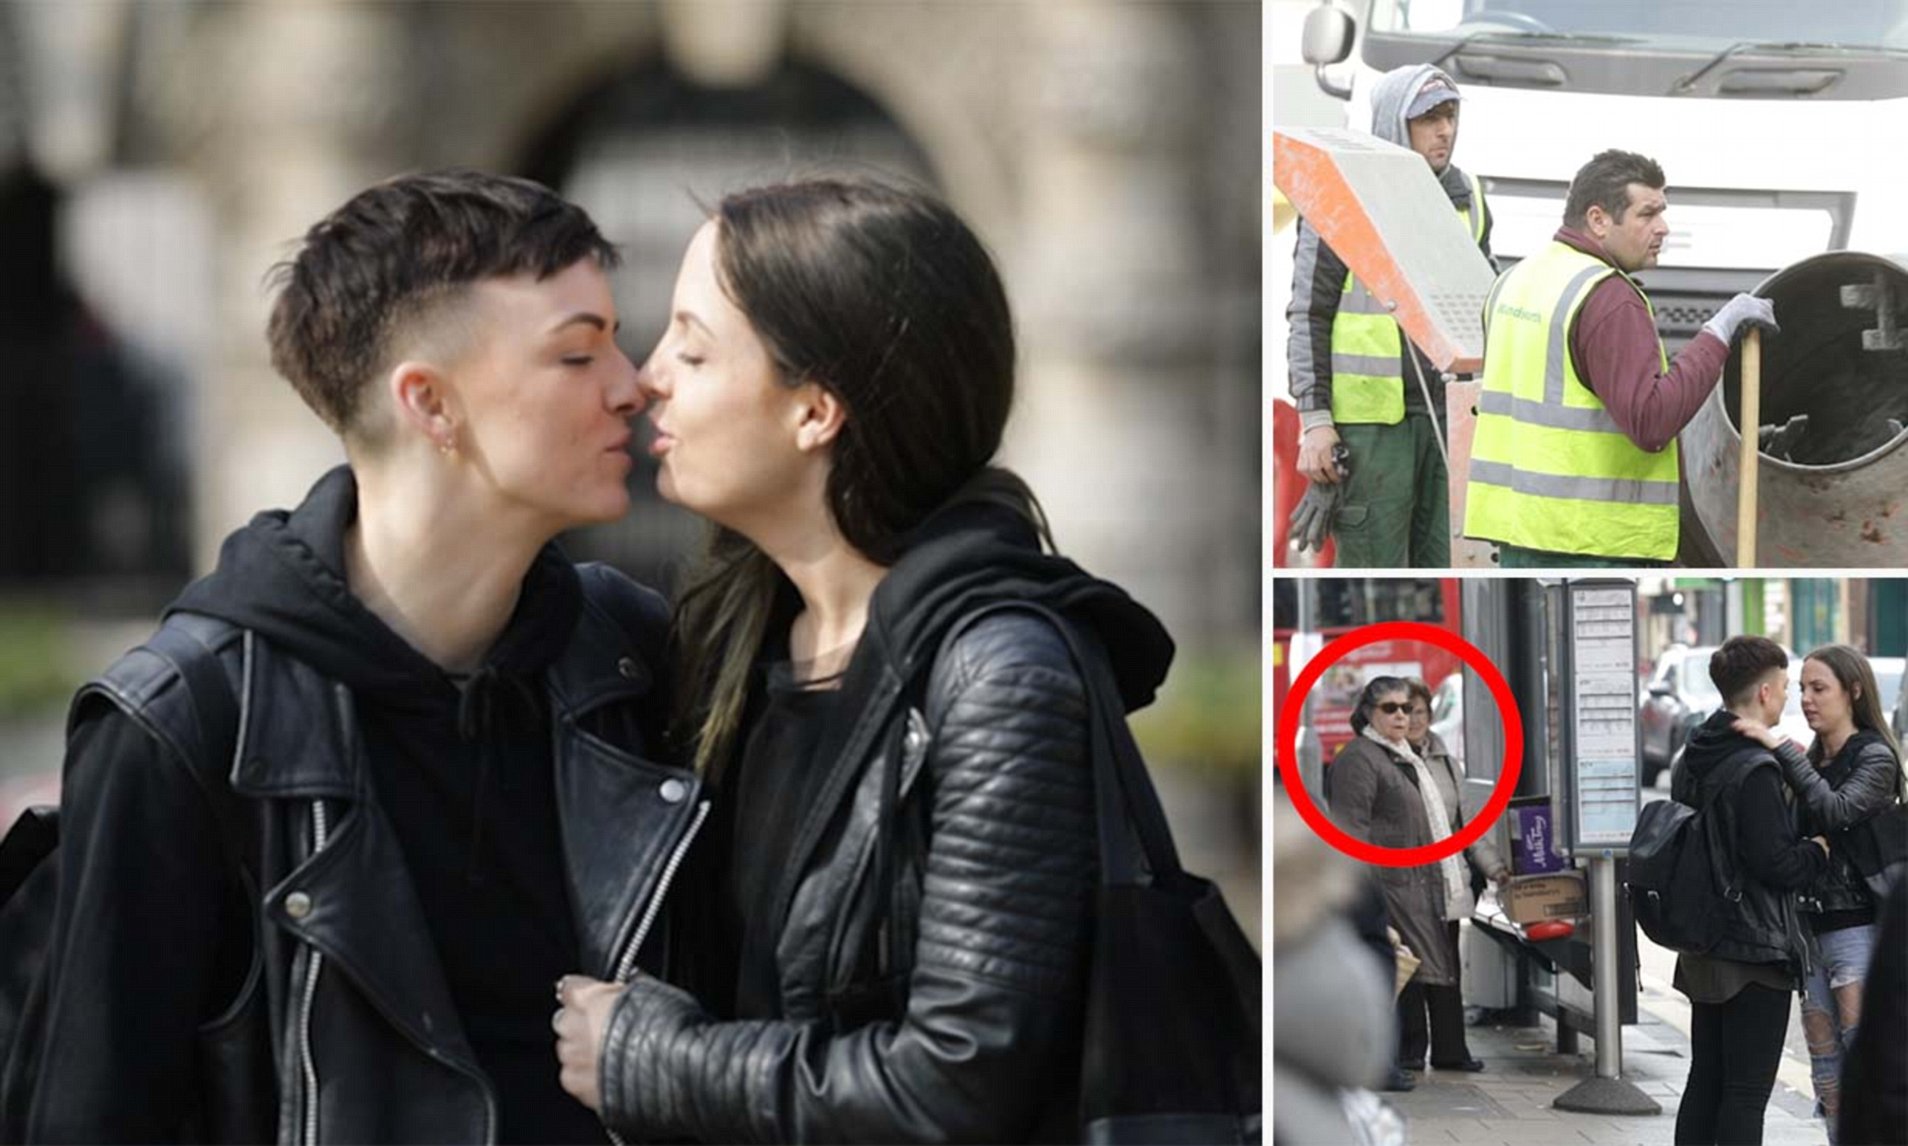 adrian whittaker recommends lesbians making out in public pic